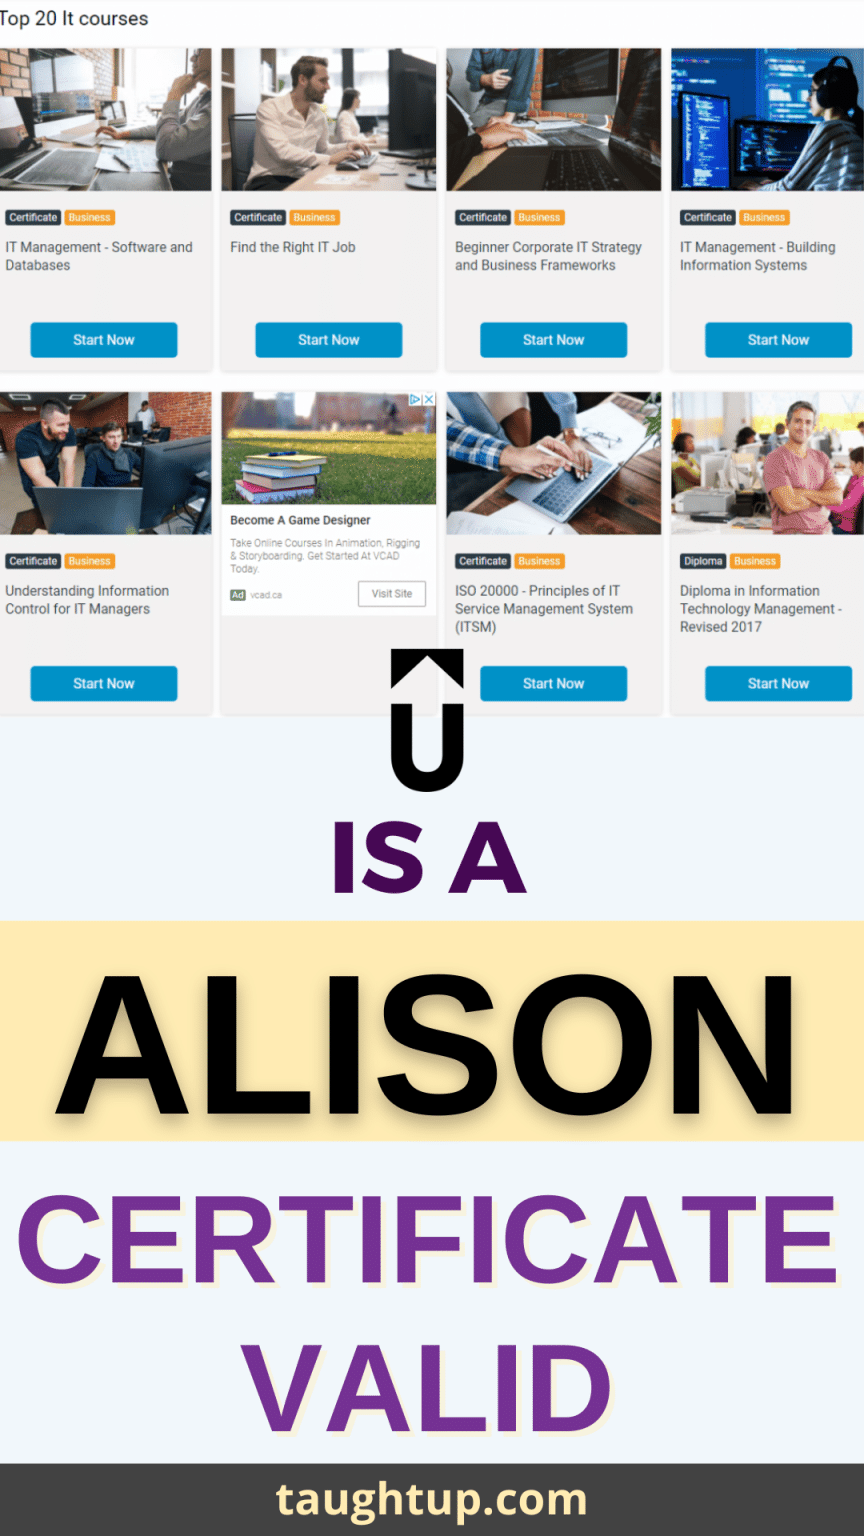 Is Alison Accredited In The USA? Are Alison Courses Accredited?